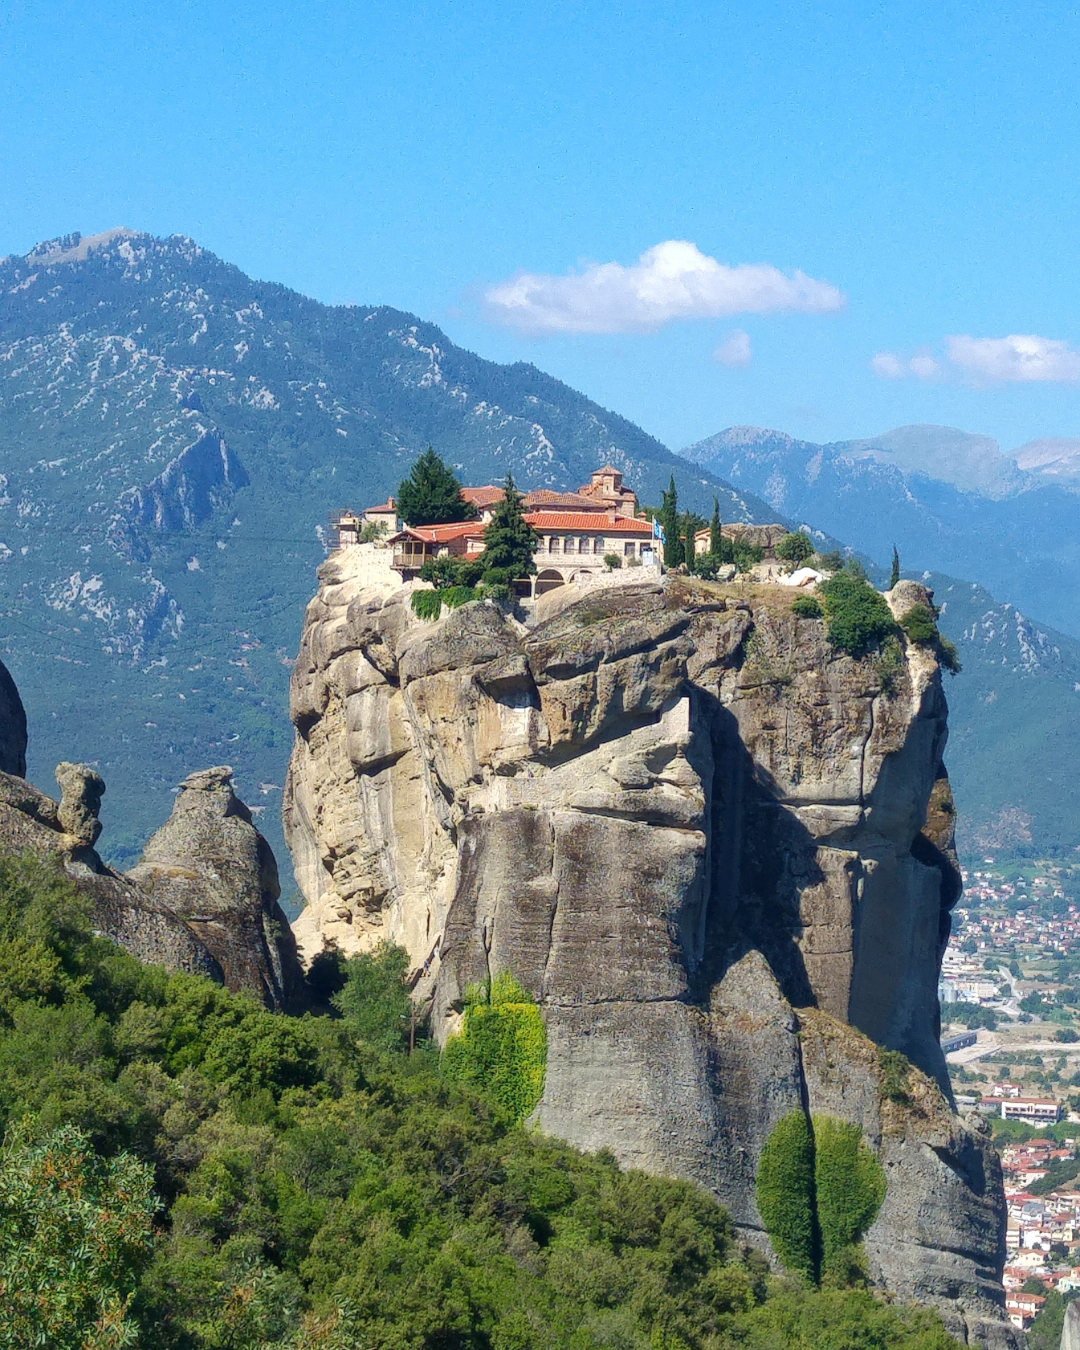 Amazing View of The Monastery of the Holy Trinity, Eastern Orthodox Monastery in Central Greece, Situated in the Peneas Valley Northeast of the town of Kalambaka. at Meteora - Greece Holidays Barter's Travelnet